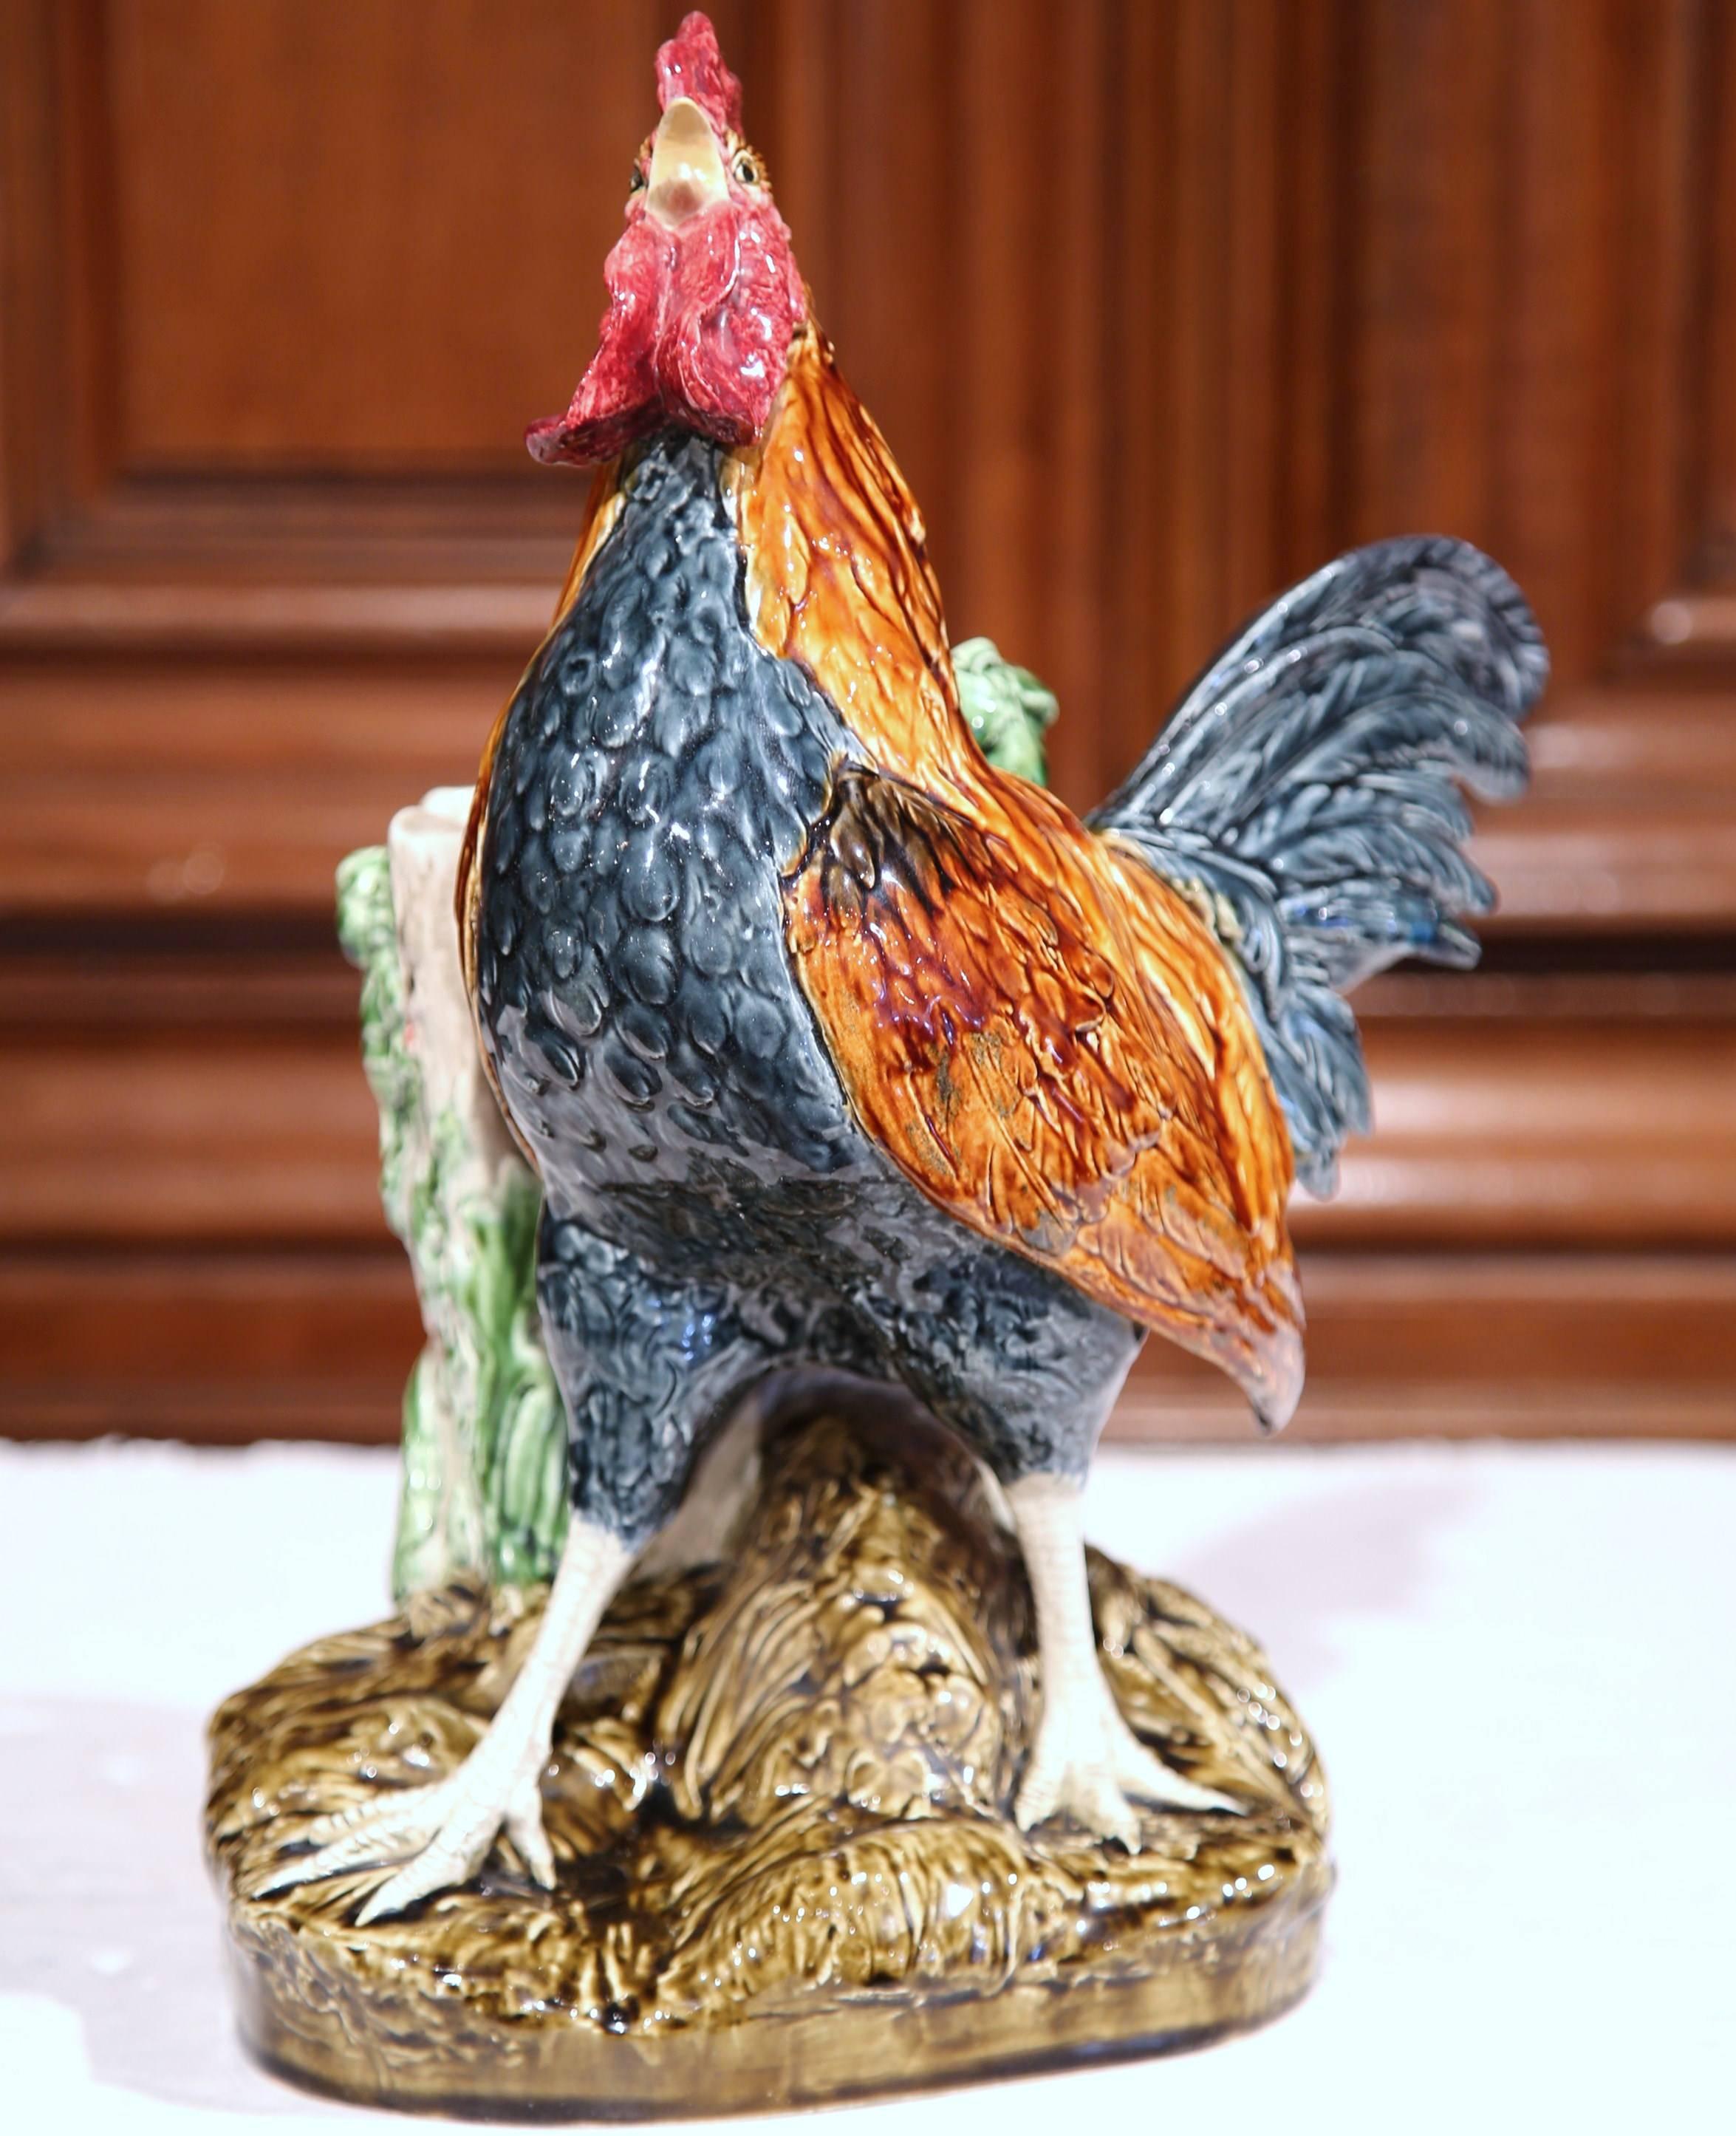 Faience 19th Century French Painted Barbotine Vase Rooster Signed Louis Carrier-Belleuse